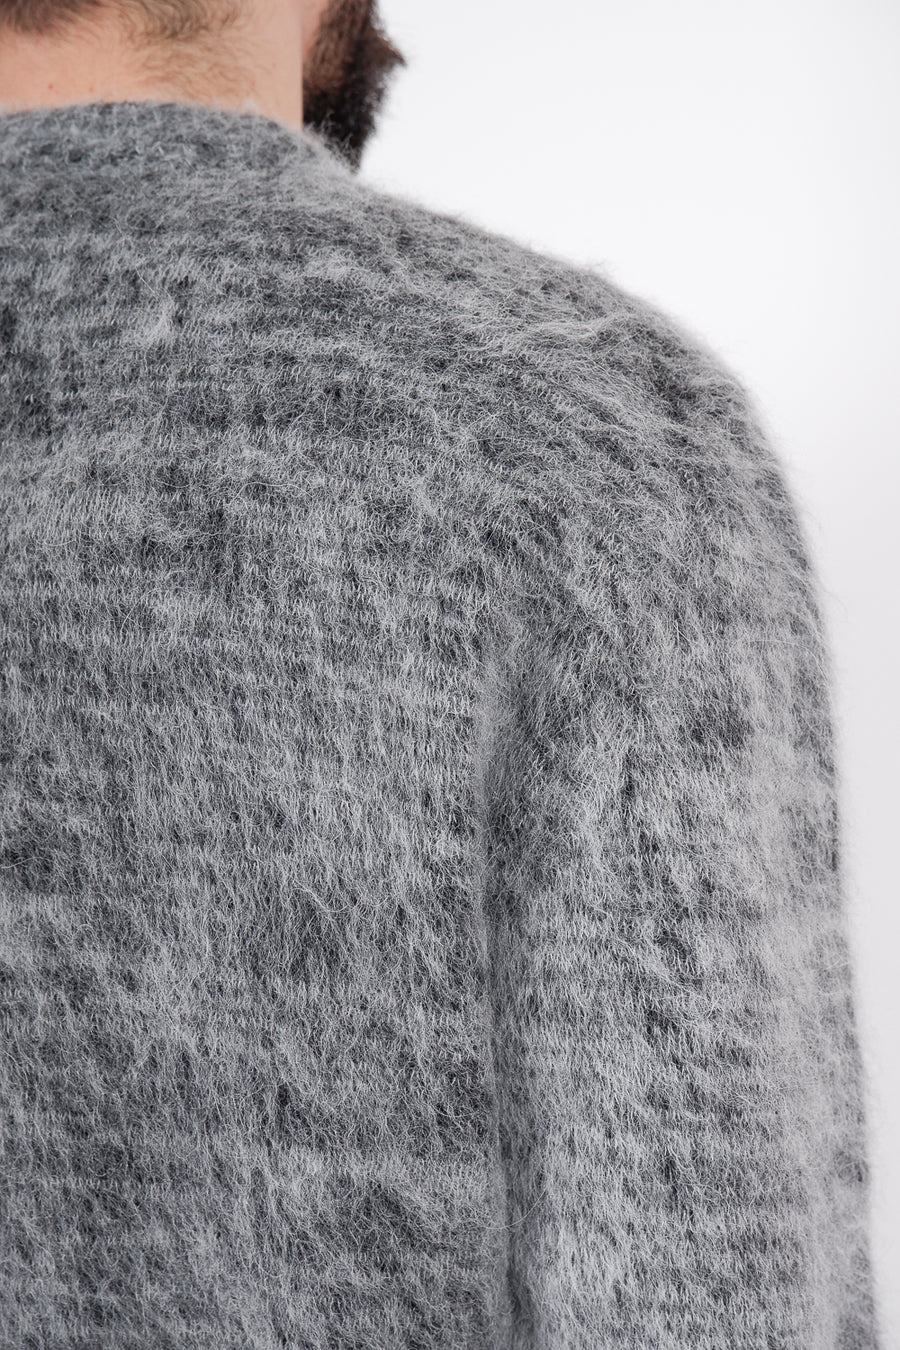 Buy the Daniele Fiesoli Brushed Alpaca Mohair Sweater Grey at Intro. Spend £50 for free UK delivery. Official stockists. We ship worldwide.